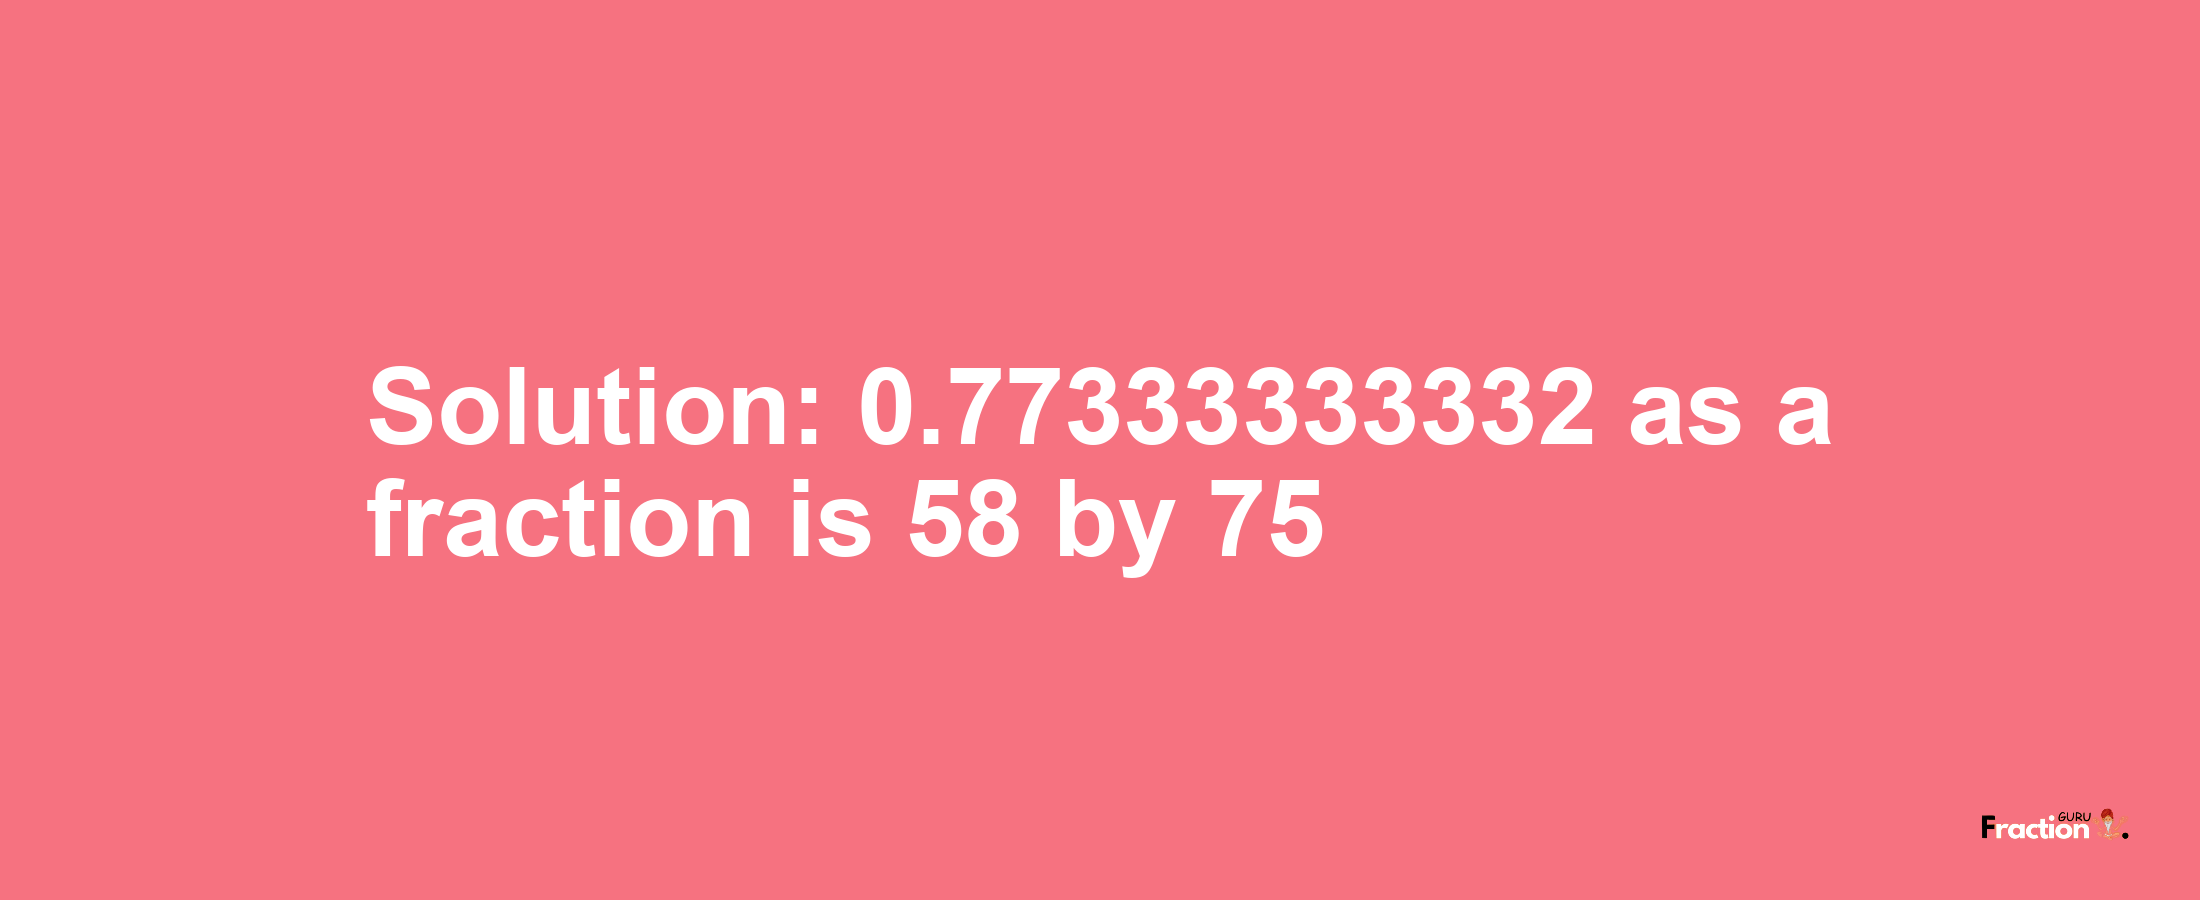 Solution:0.77333333332 as a fraction is 58/75